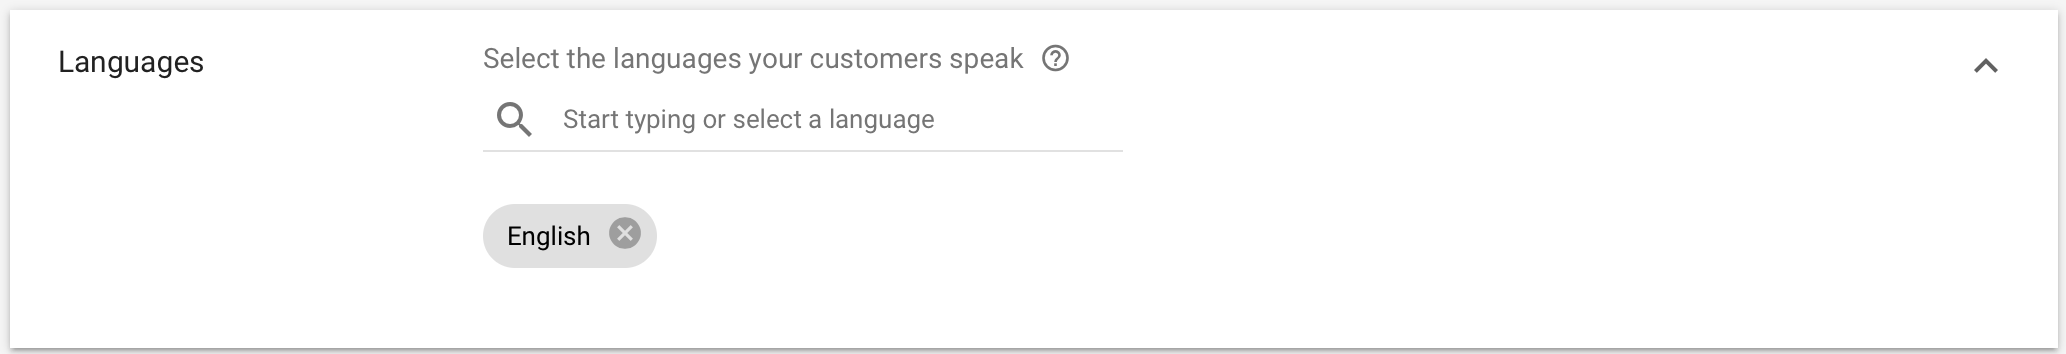 Languages in Google Ads